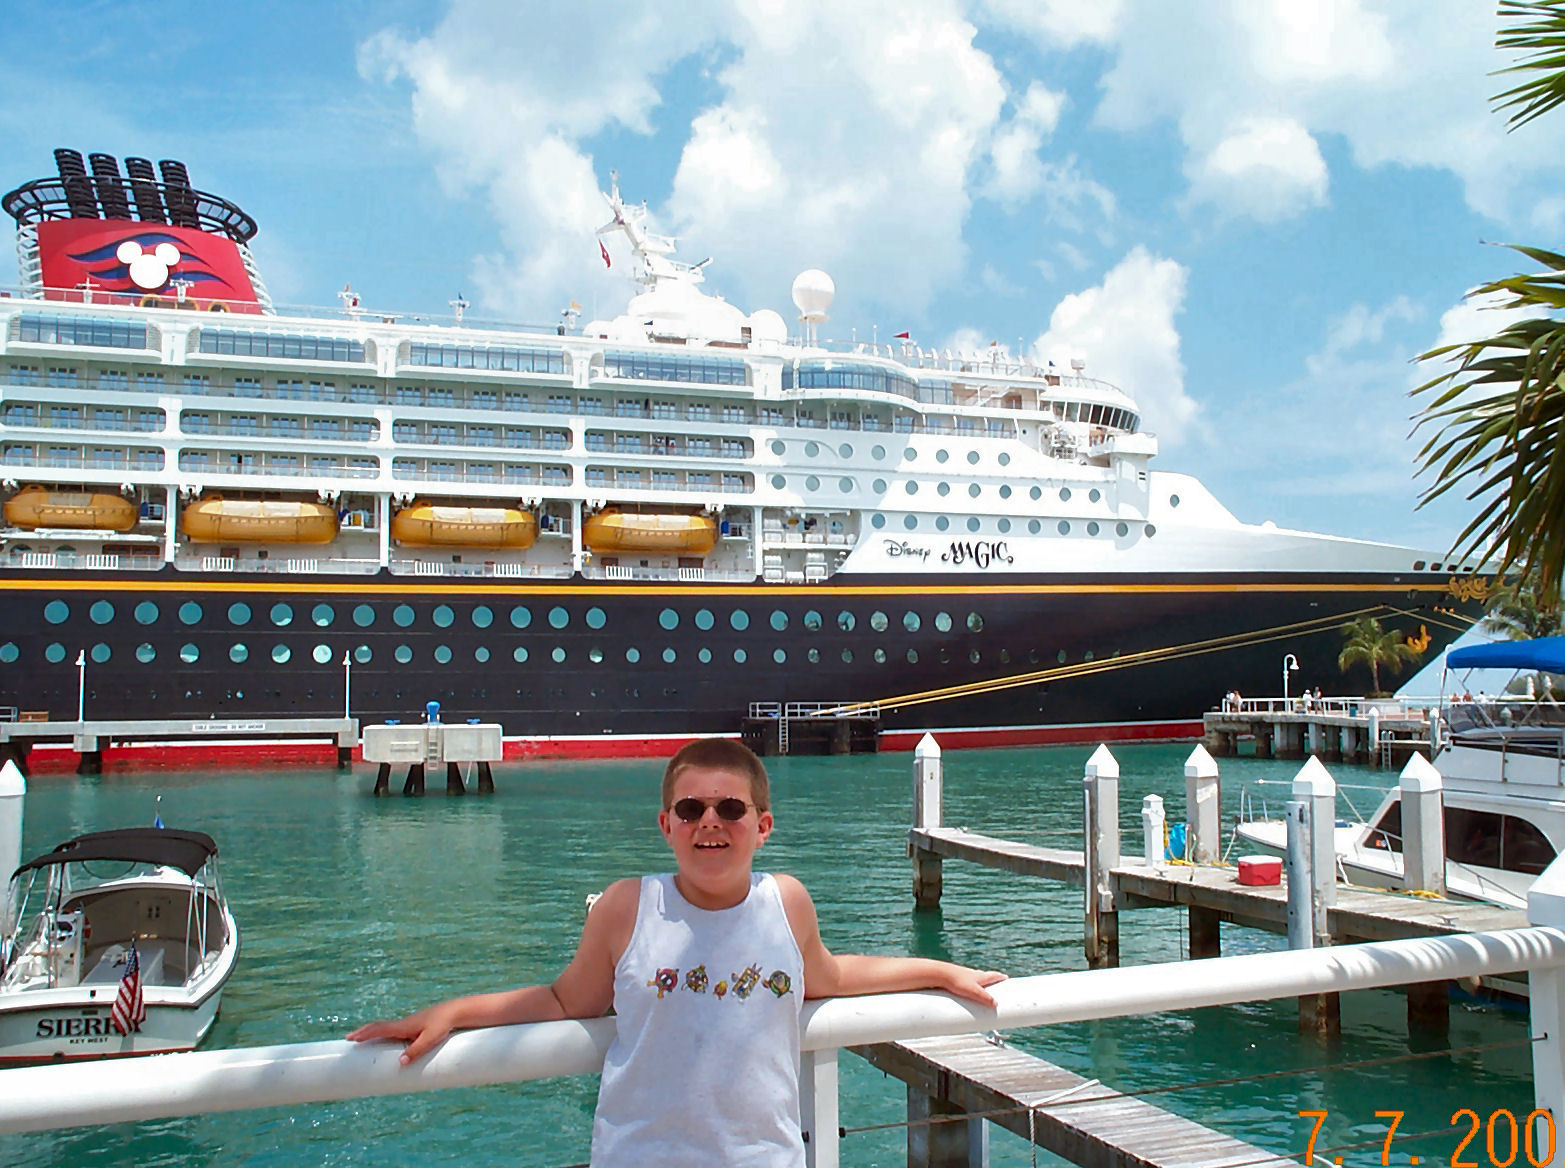 Me in front of the Disney Magic on Key West, Florida.